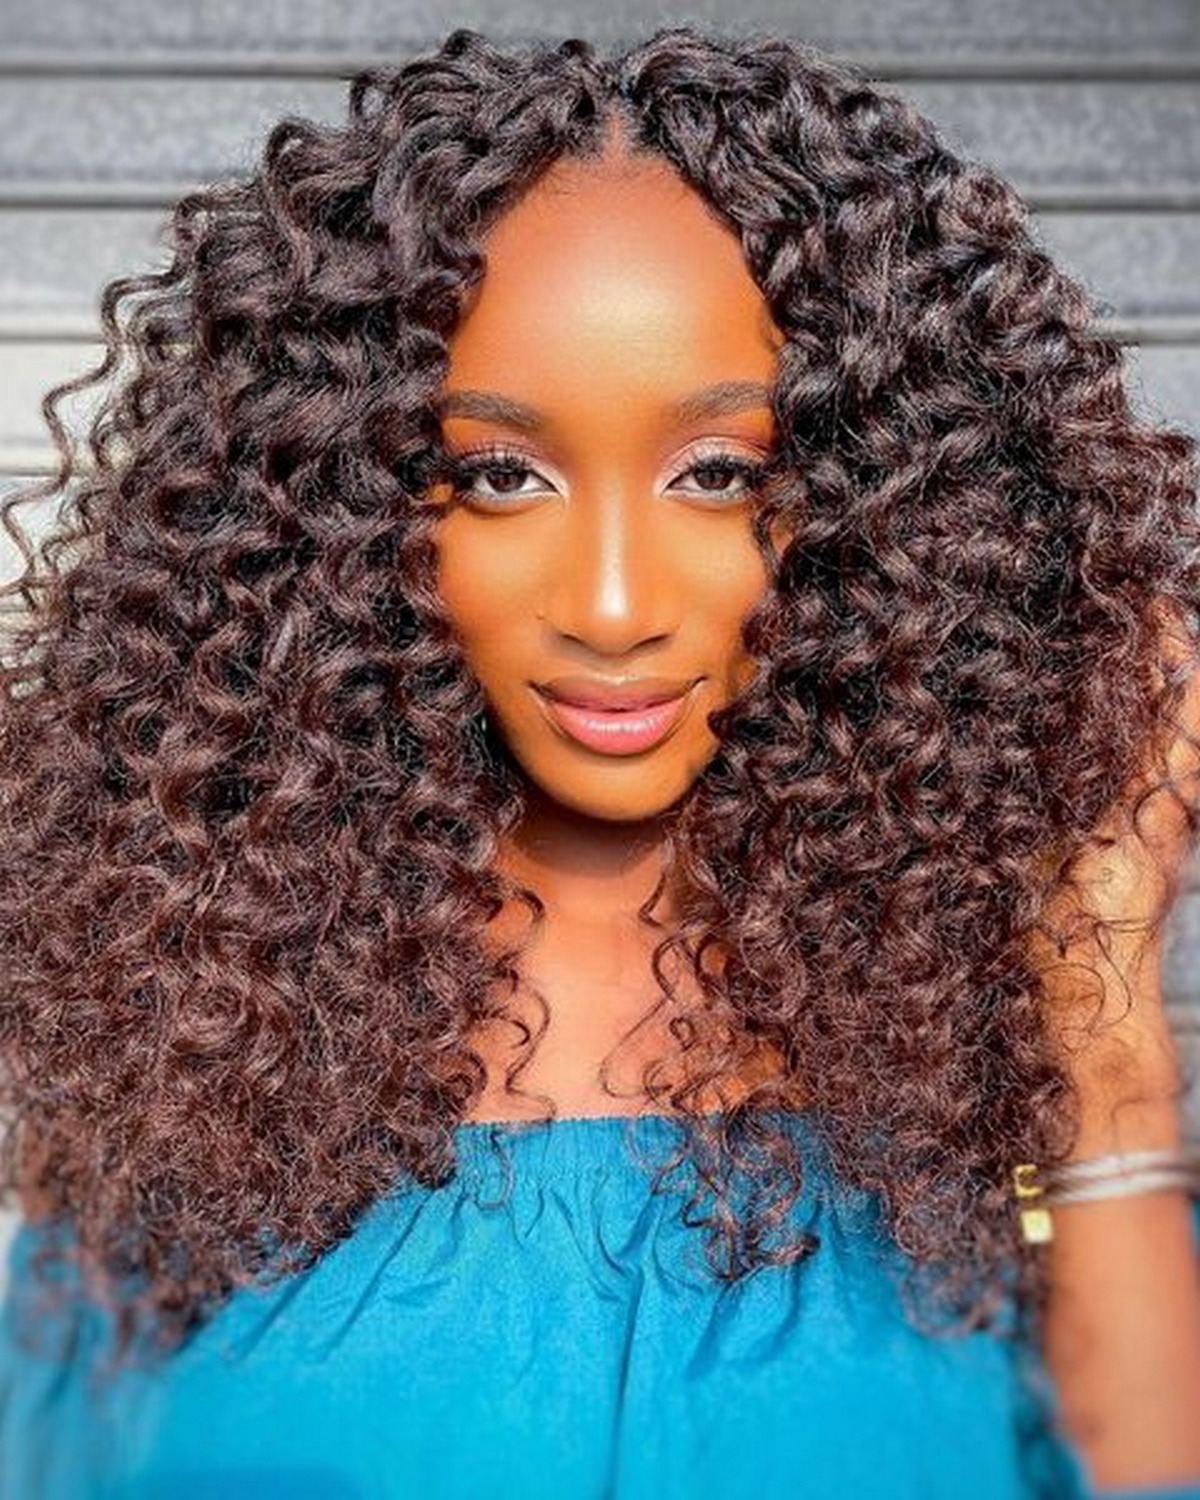 uxurious Crochet Curls With An Ombre Color